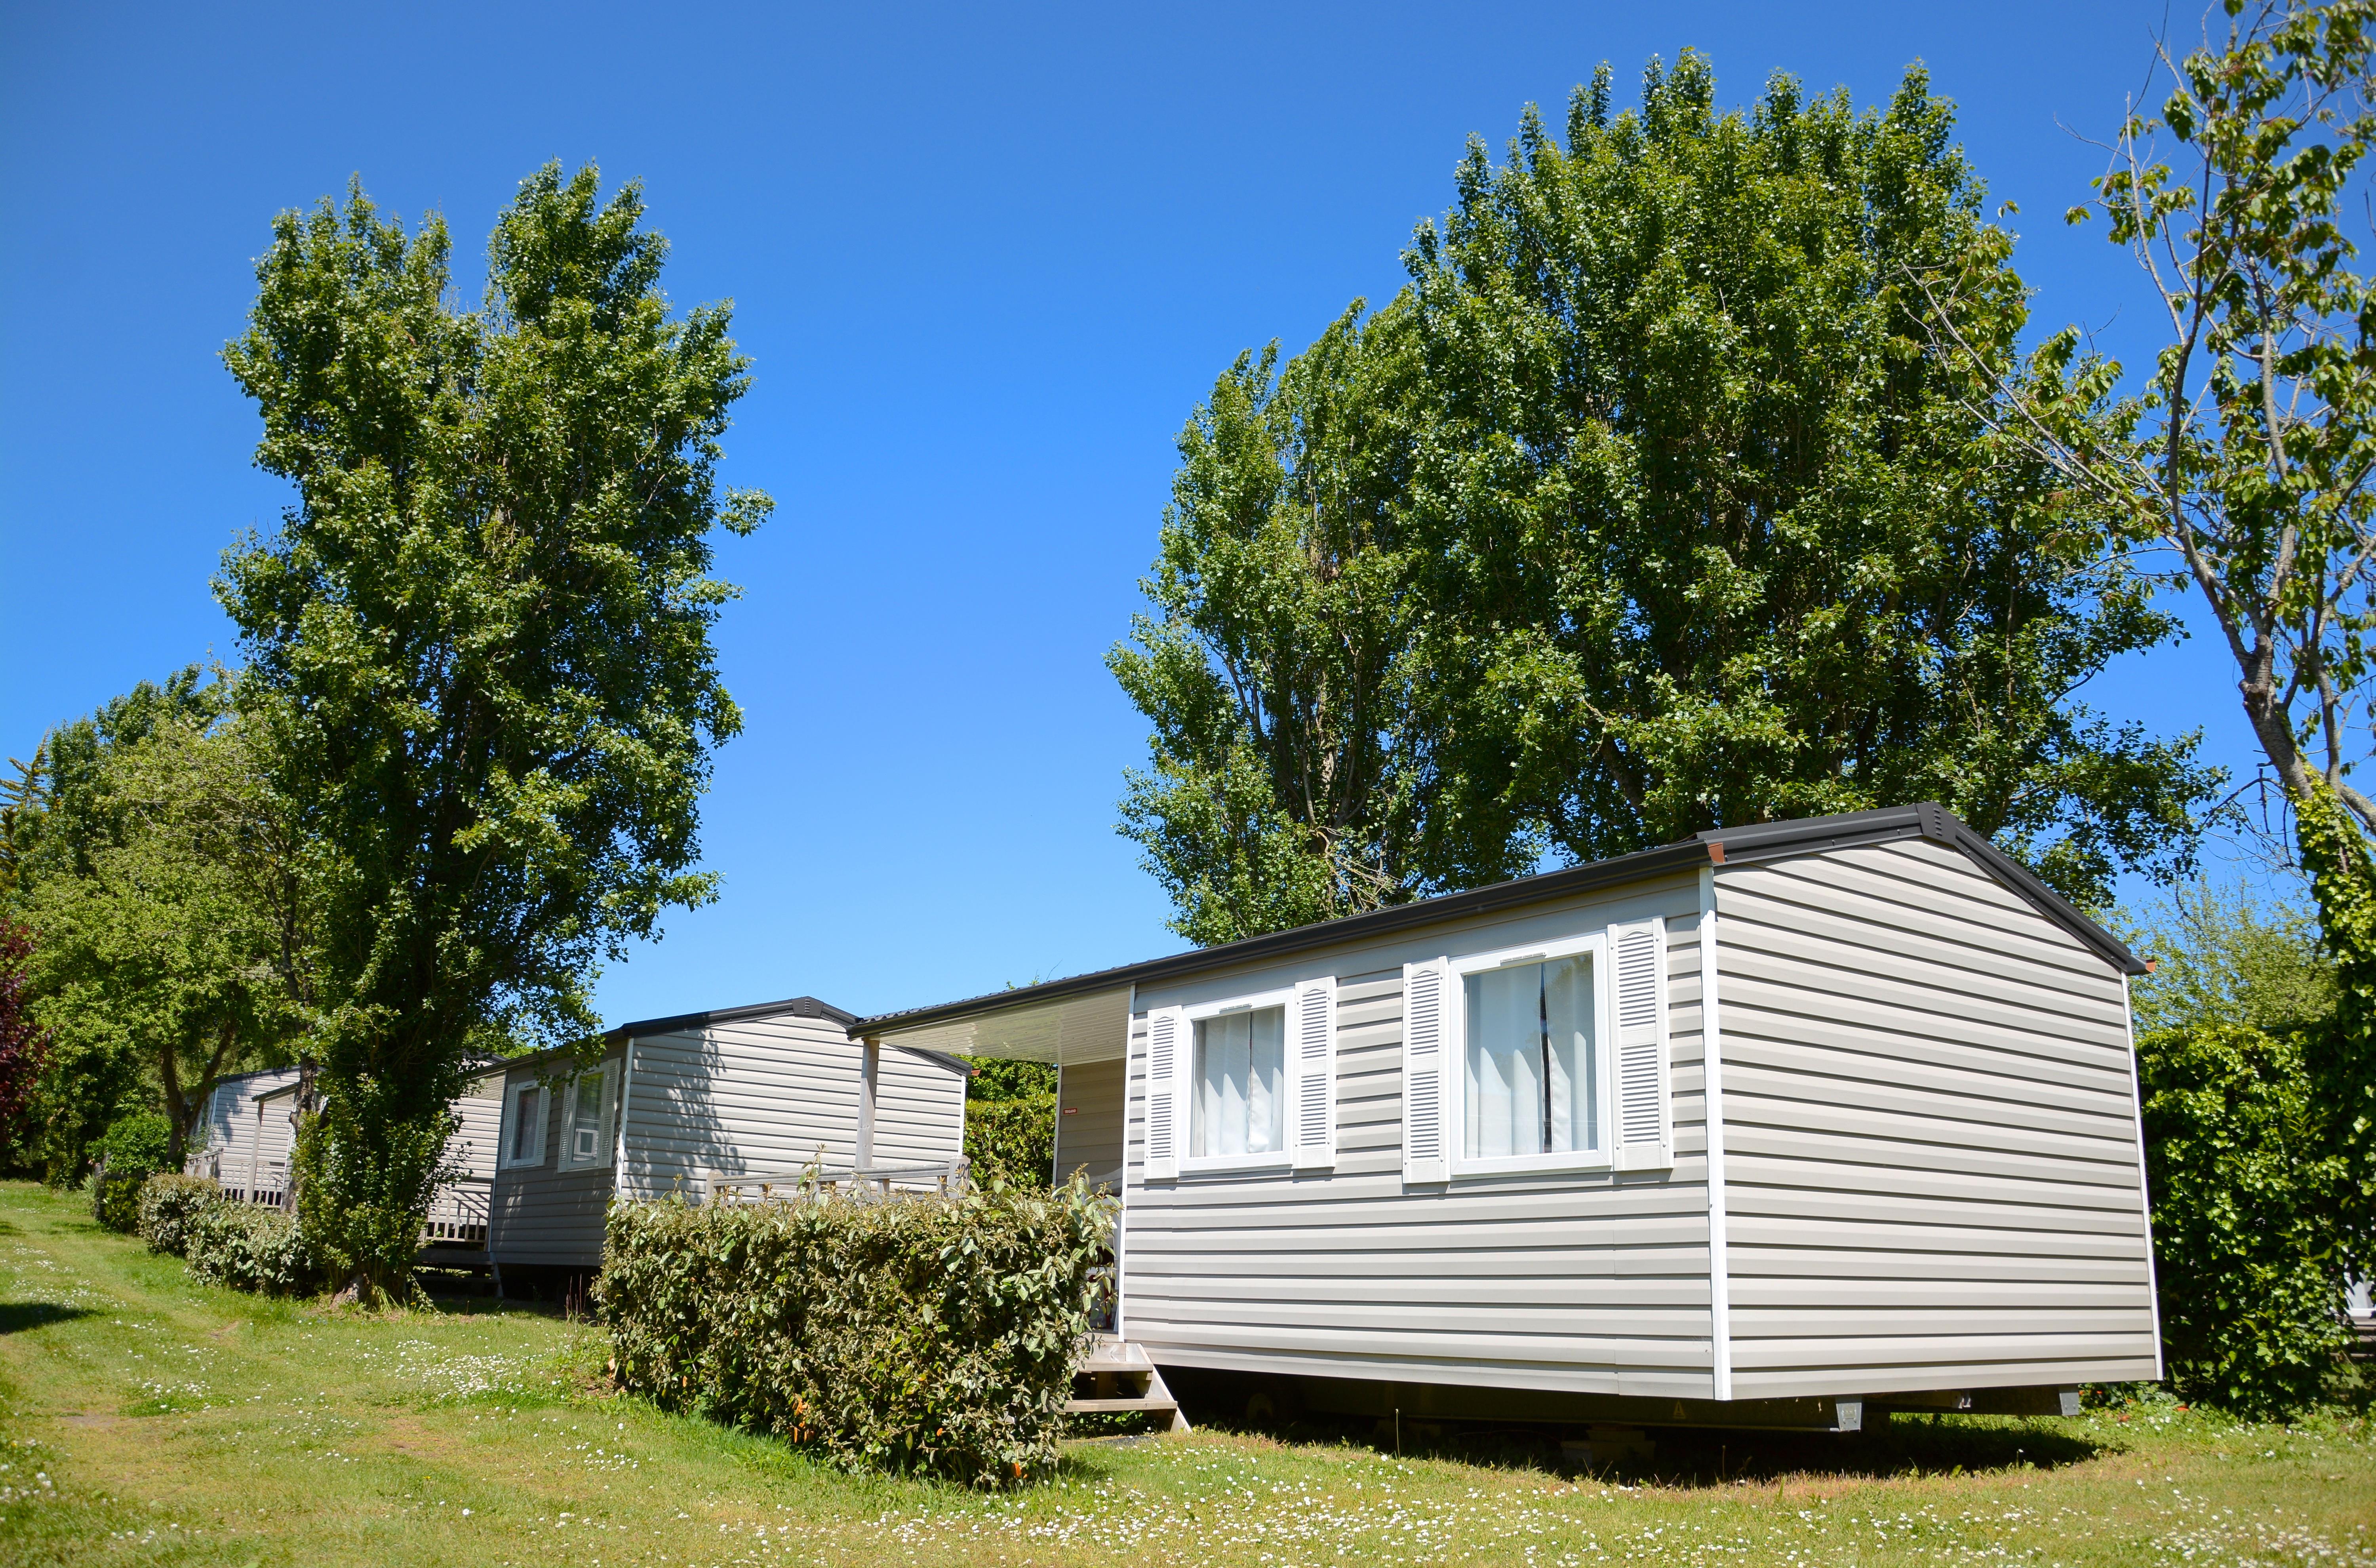 2 bedroom/4 people mobile-home with terrace in a beautiful woody park